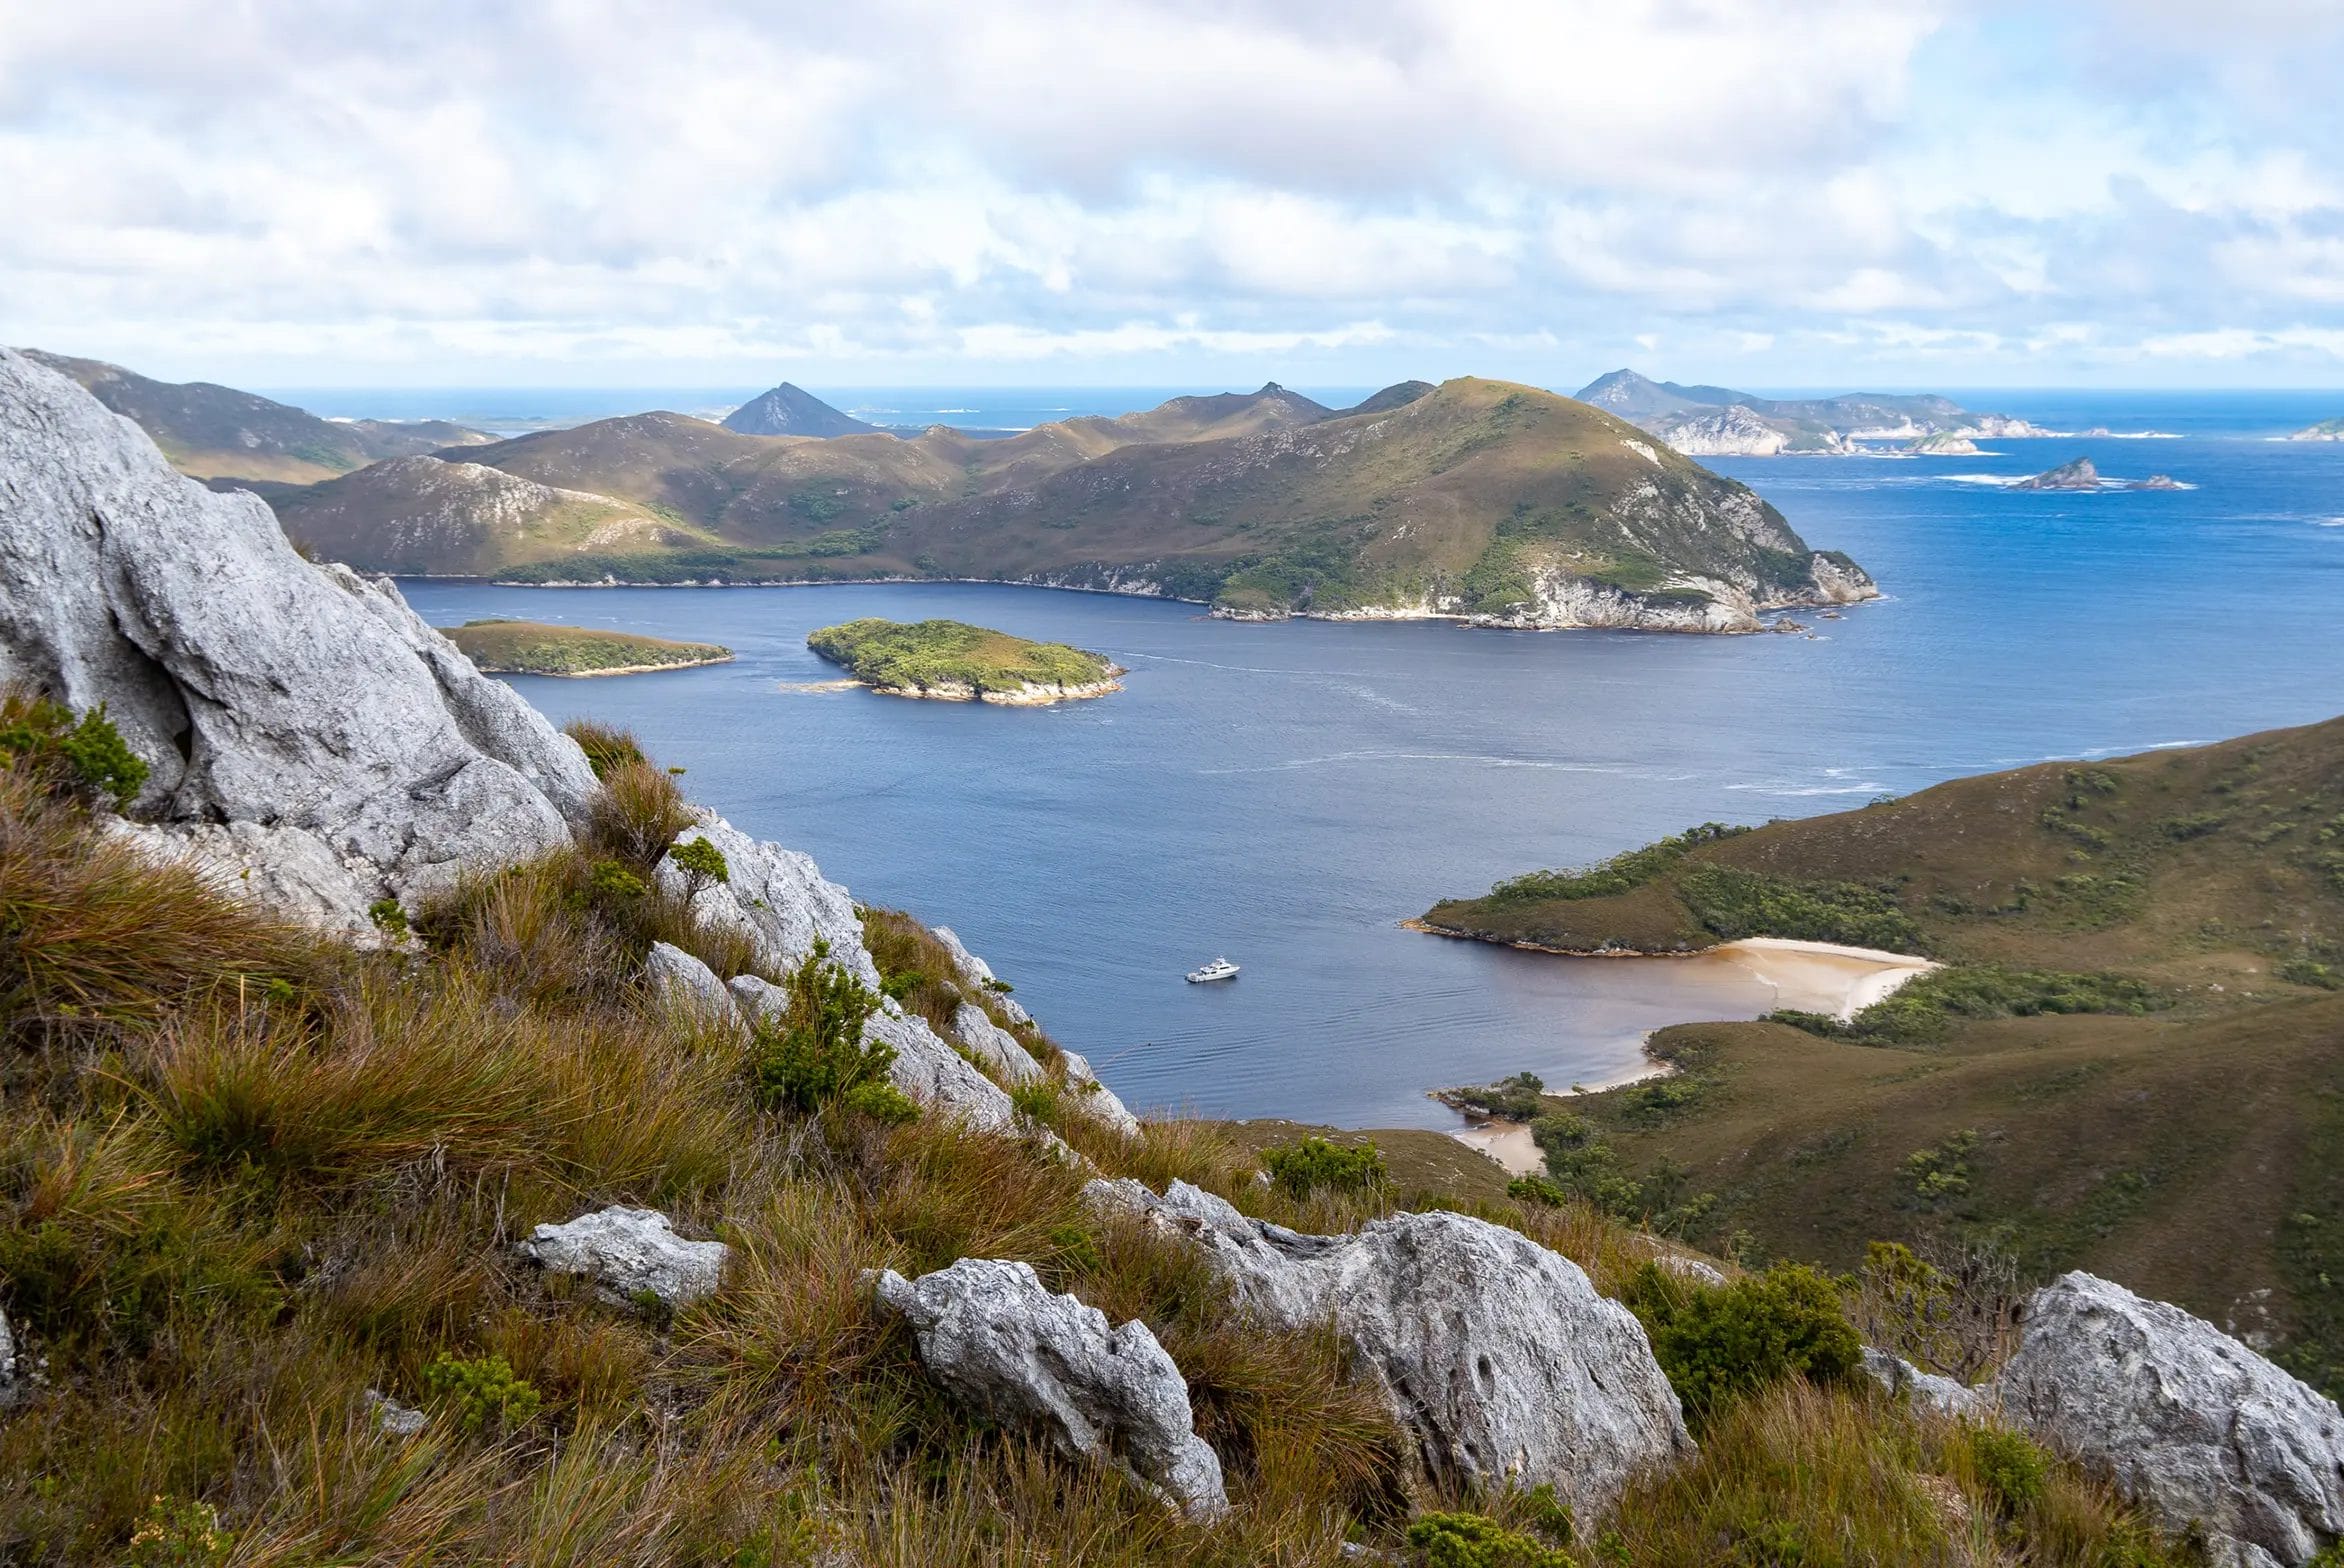 Landscape views of the Port Davey inlet within Tasmania’s World Heritage listed Southwest Wilderness area